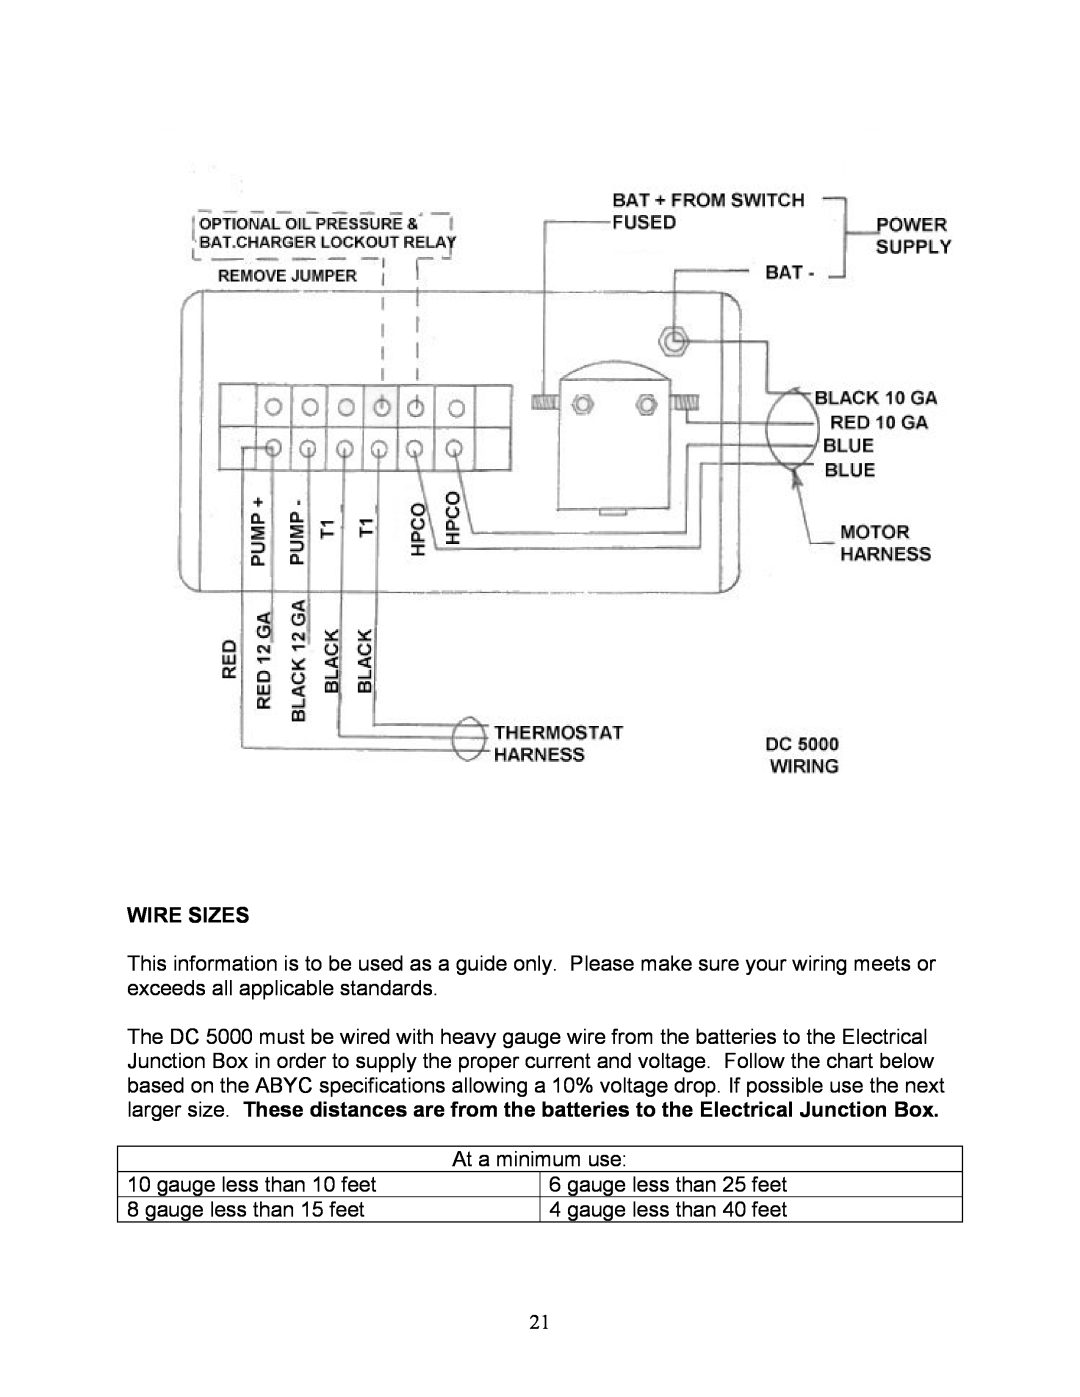 Sea Frost DC 5000 installation instructions Wire Sizes 